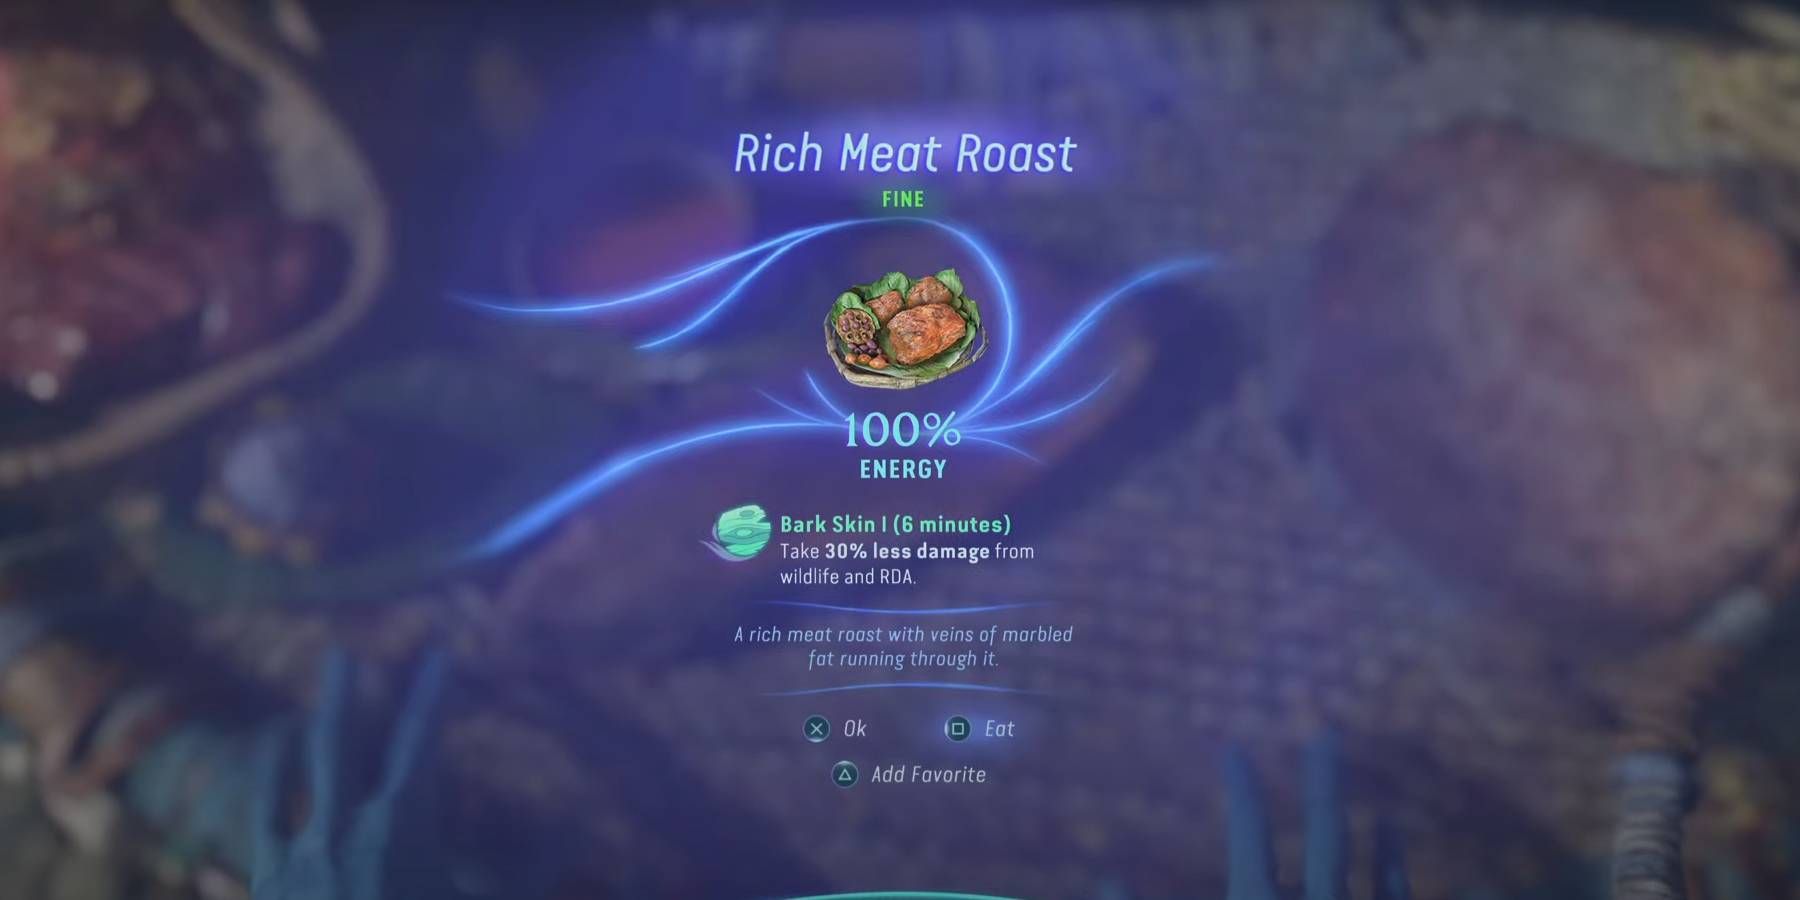 Avatar: Frontiers of Pandora Rich Meat Roast Food Item with Effect Displayed